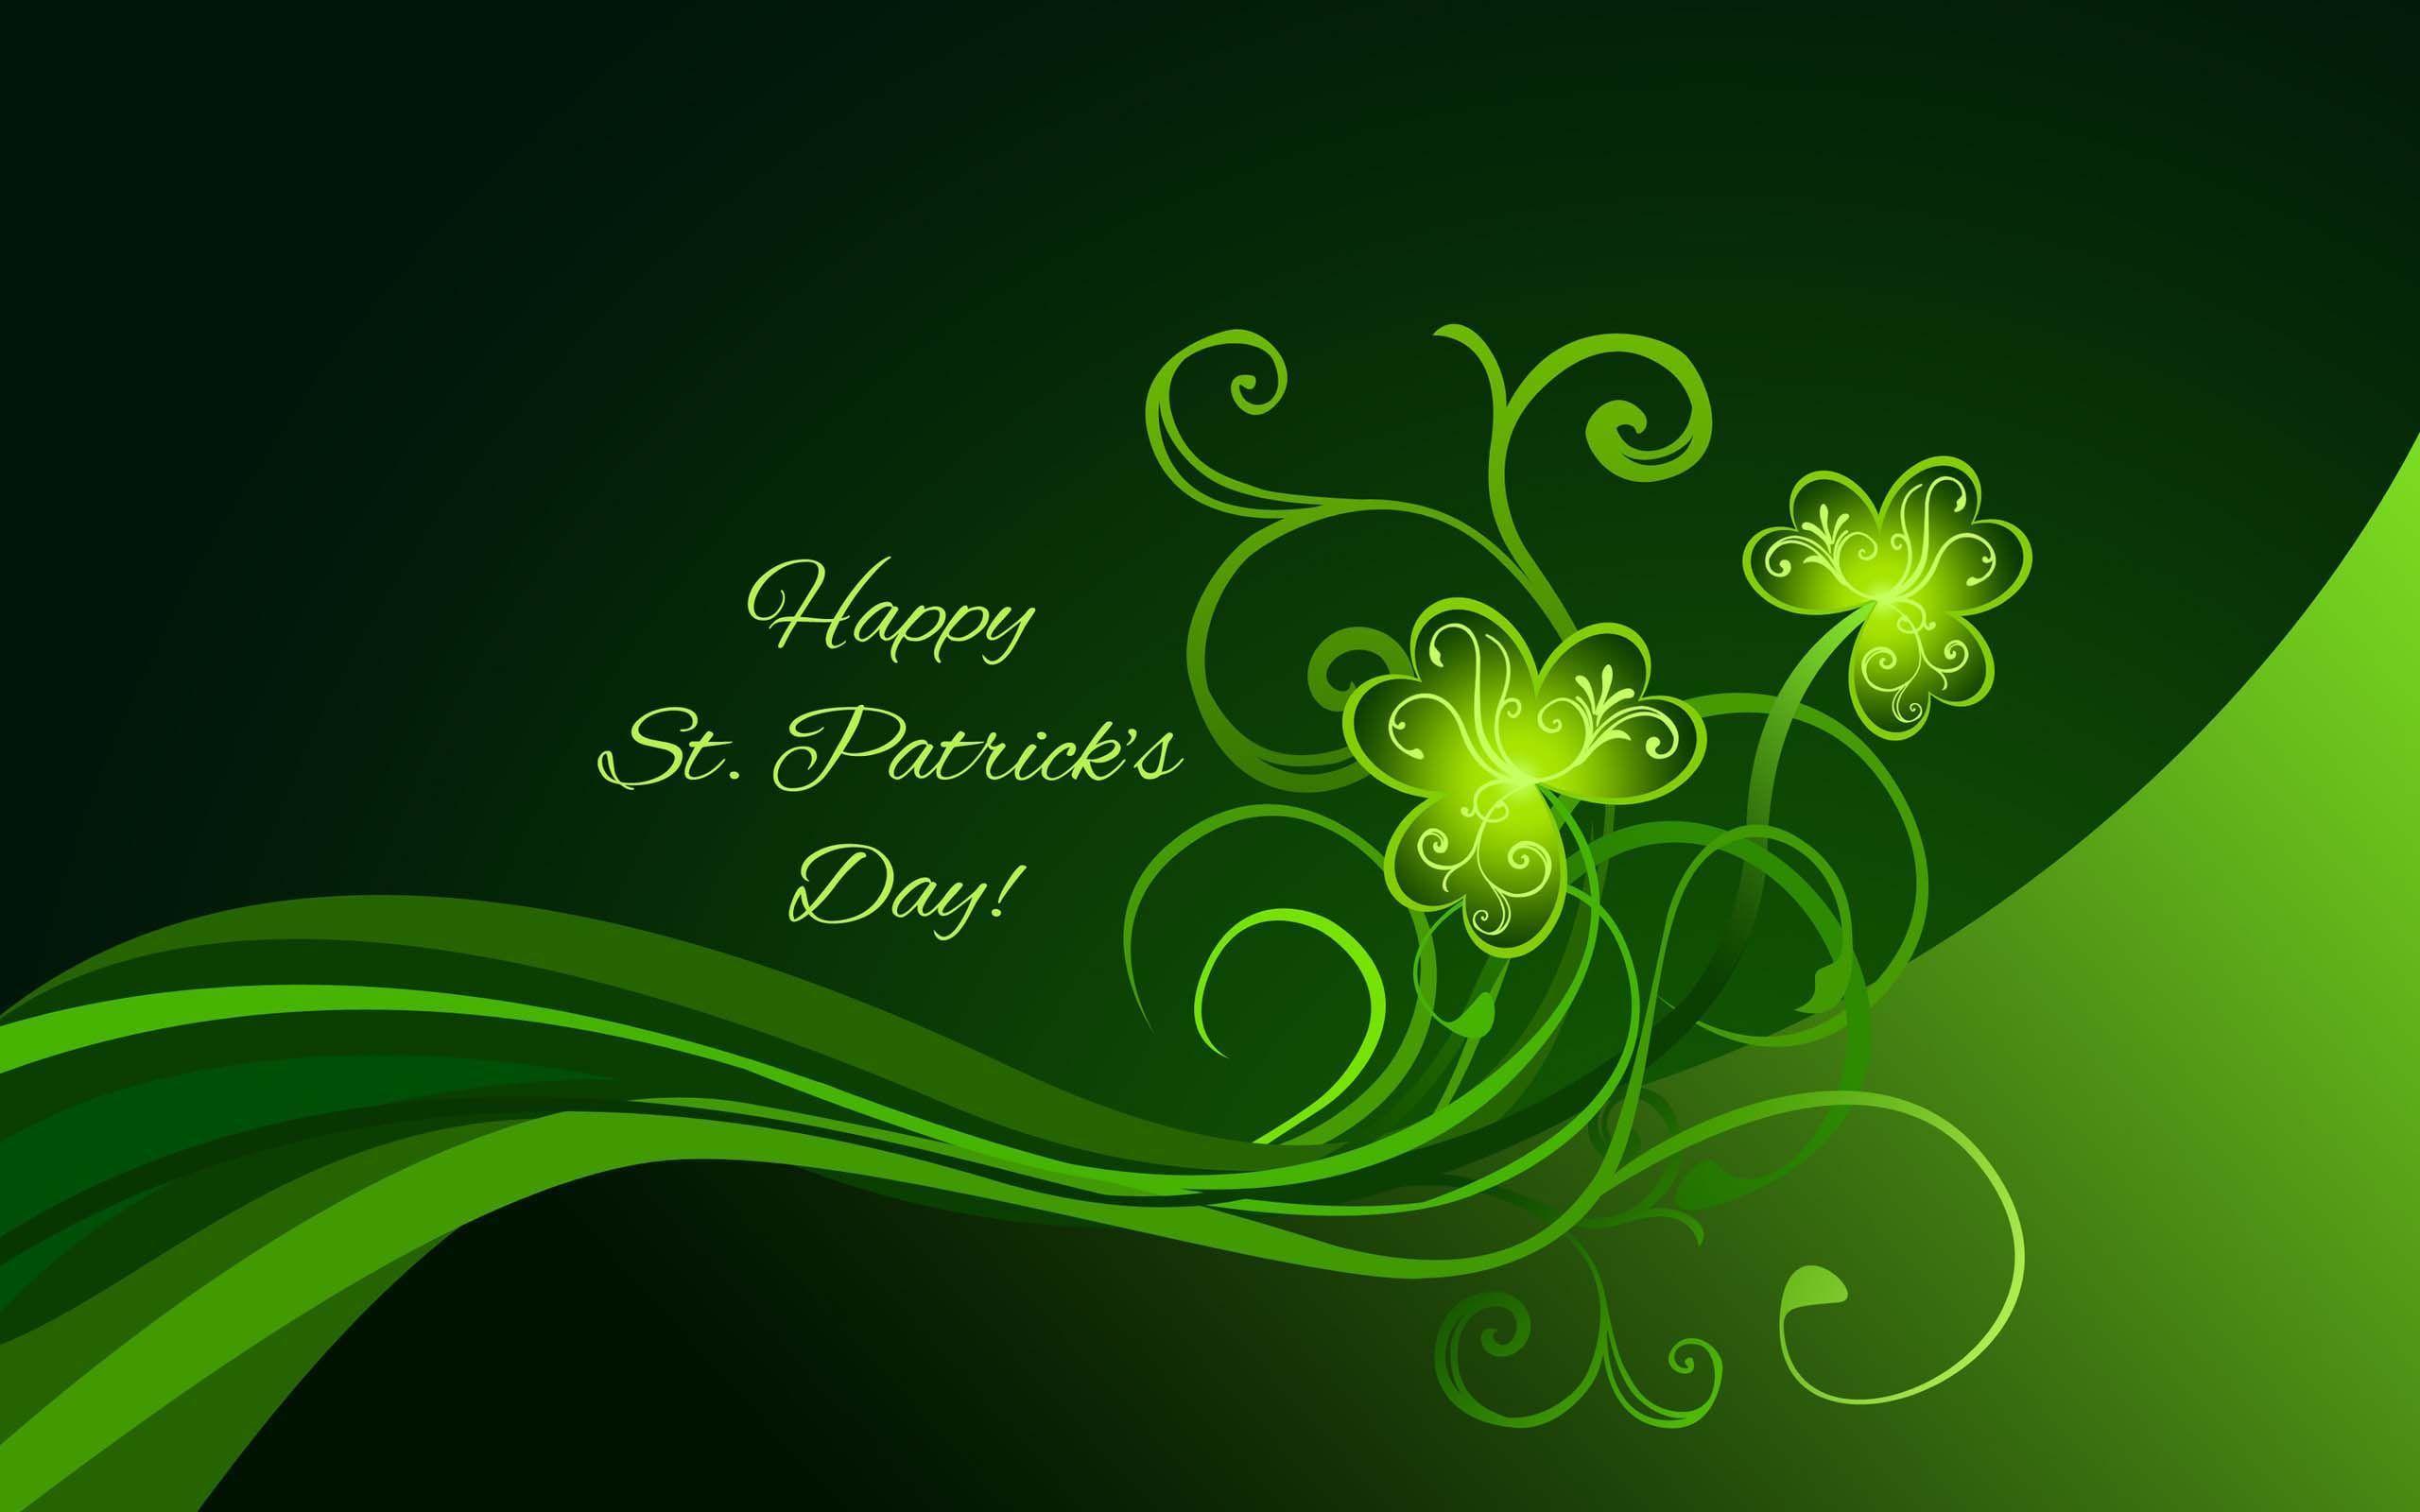 Happy St Patrick's Day CoolWallpaper 2880×1800. St patricks day picture, St patricks day wallpaper, St patricks day quotes